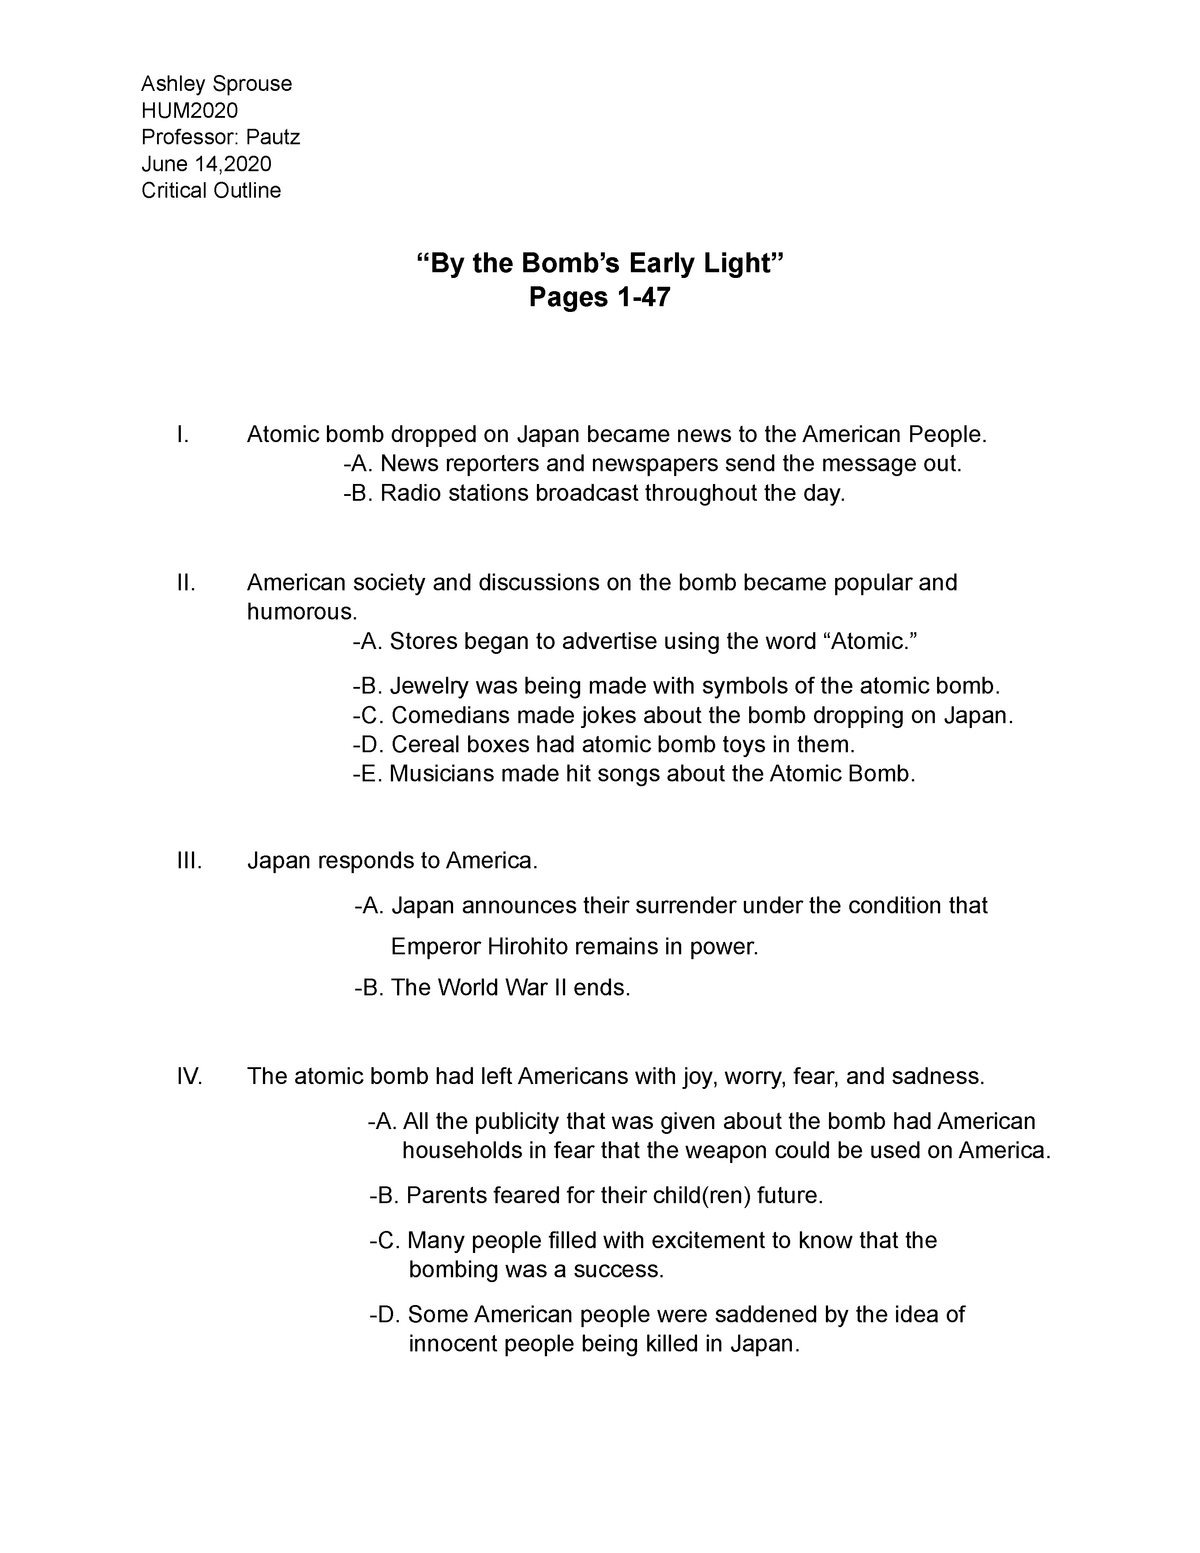 By the Bomb's Early Light Critical Outline 1-47 - HUM Professor: Pautz ...